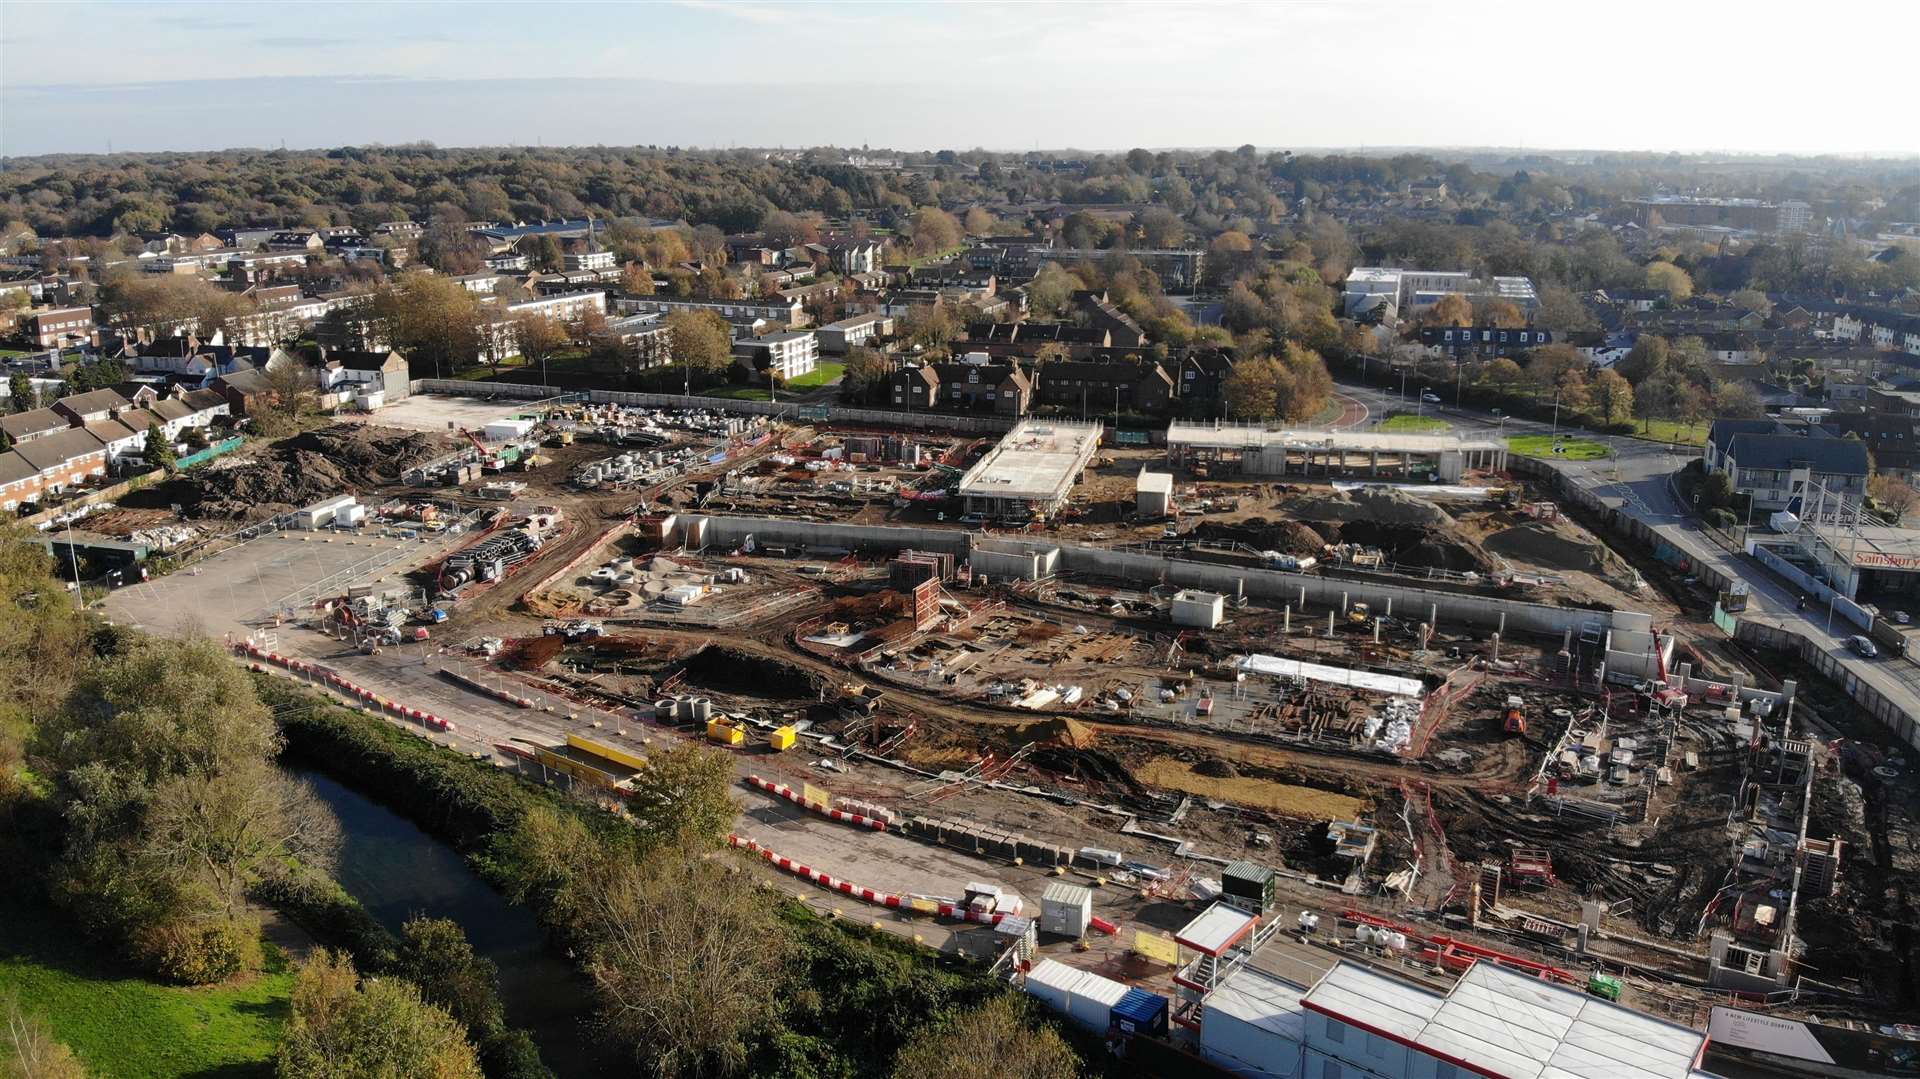 Pictured this month, the Kingsmead development is progressing